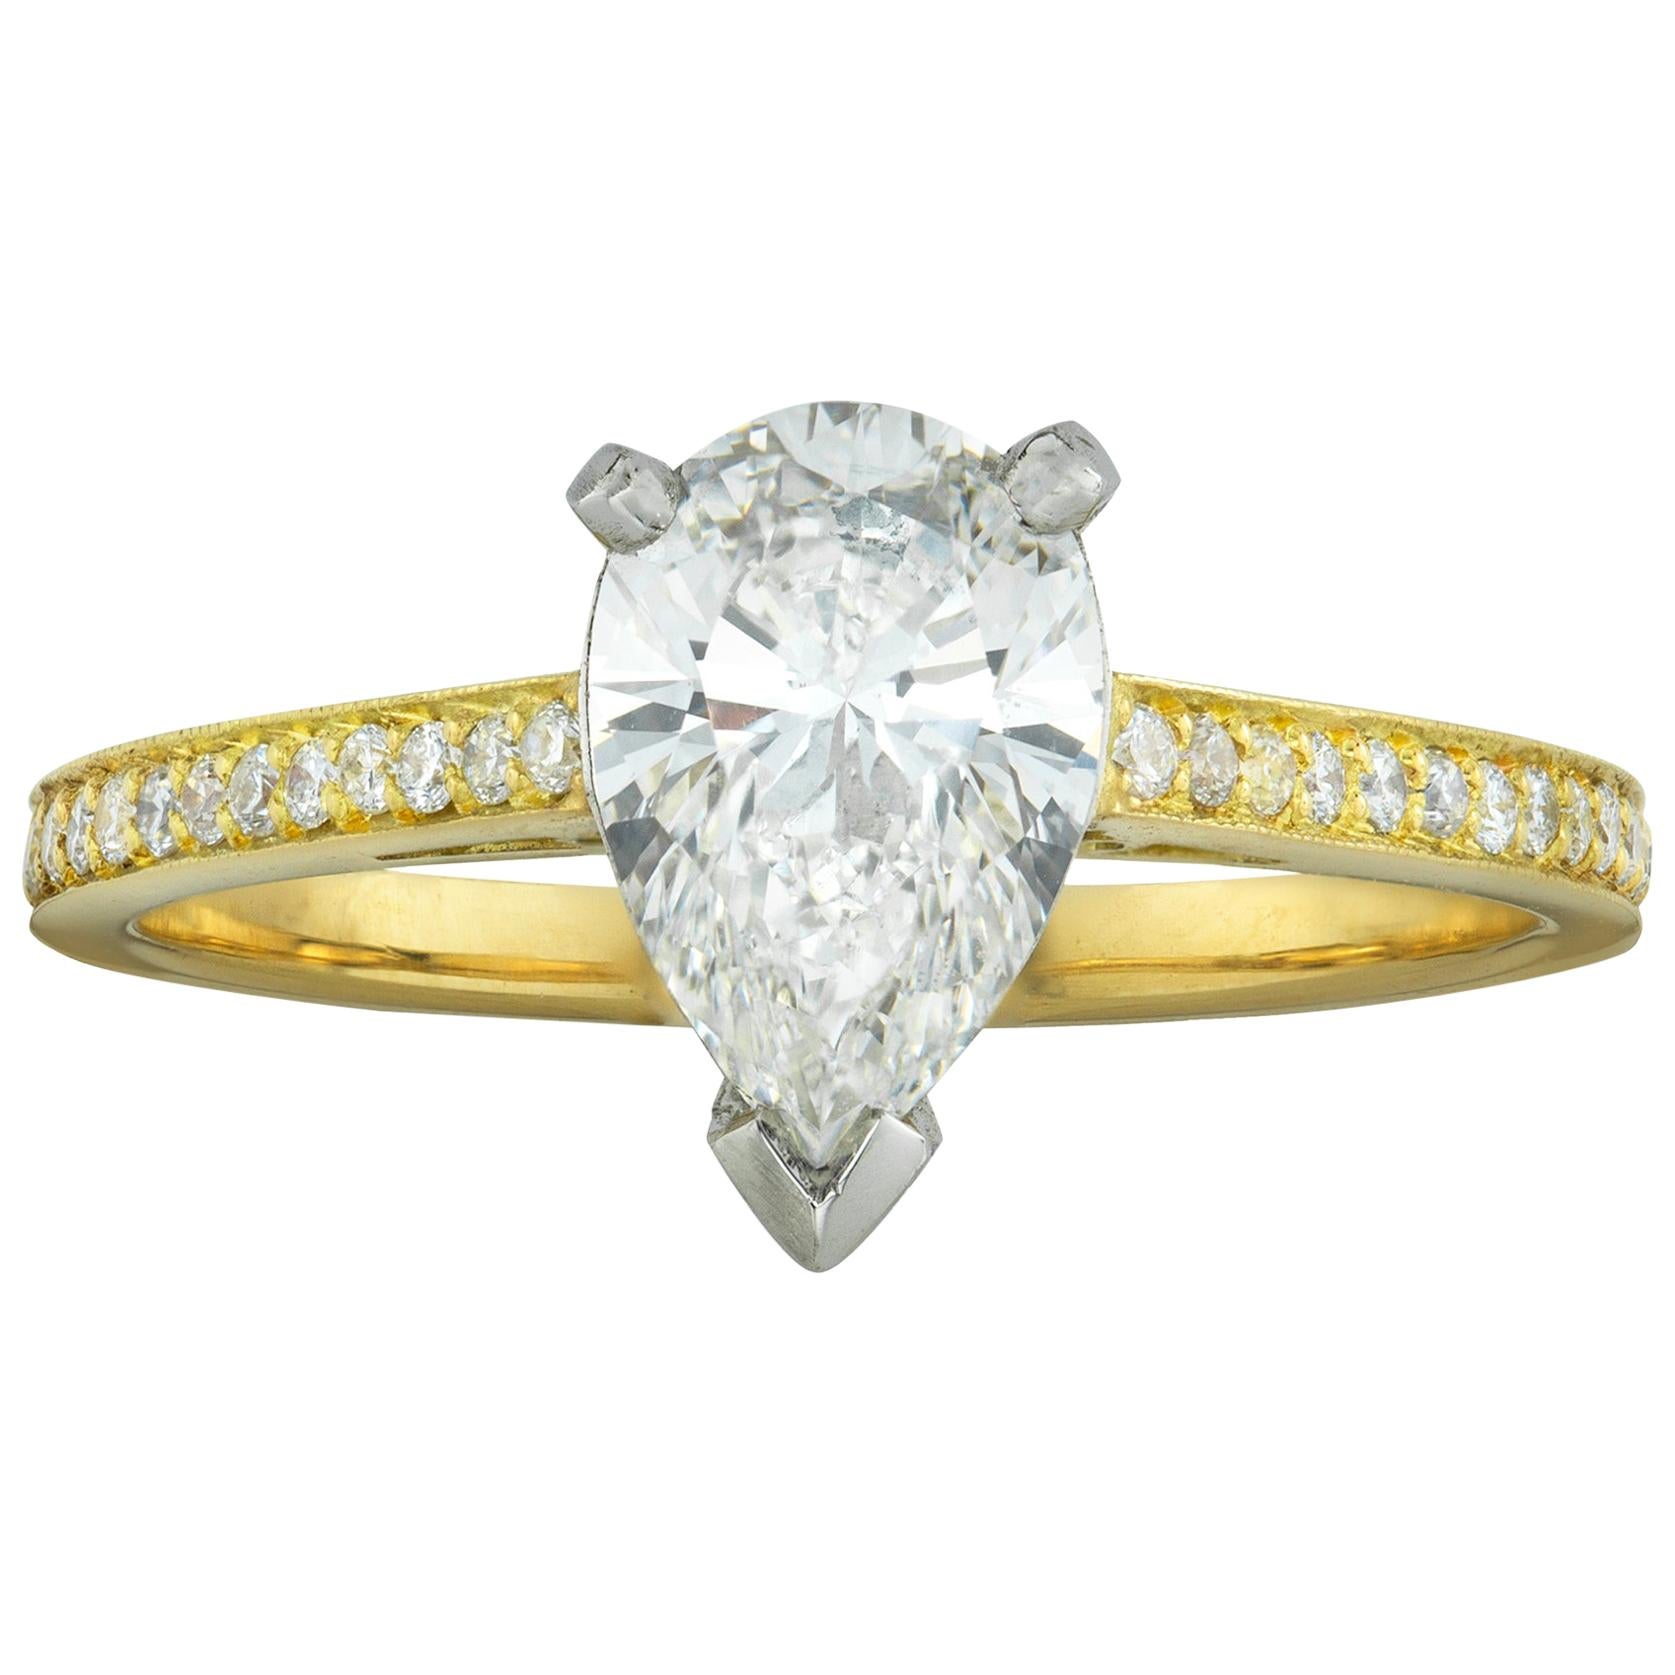 GCS Certified 1.13 Carat Pear-Shaped Solitaire Diamond Ring For Sale